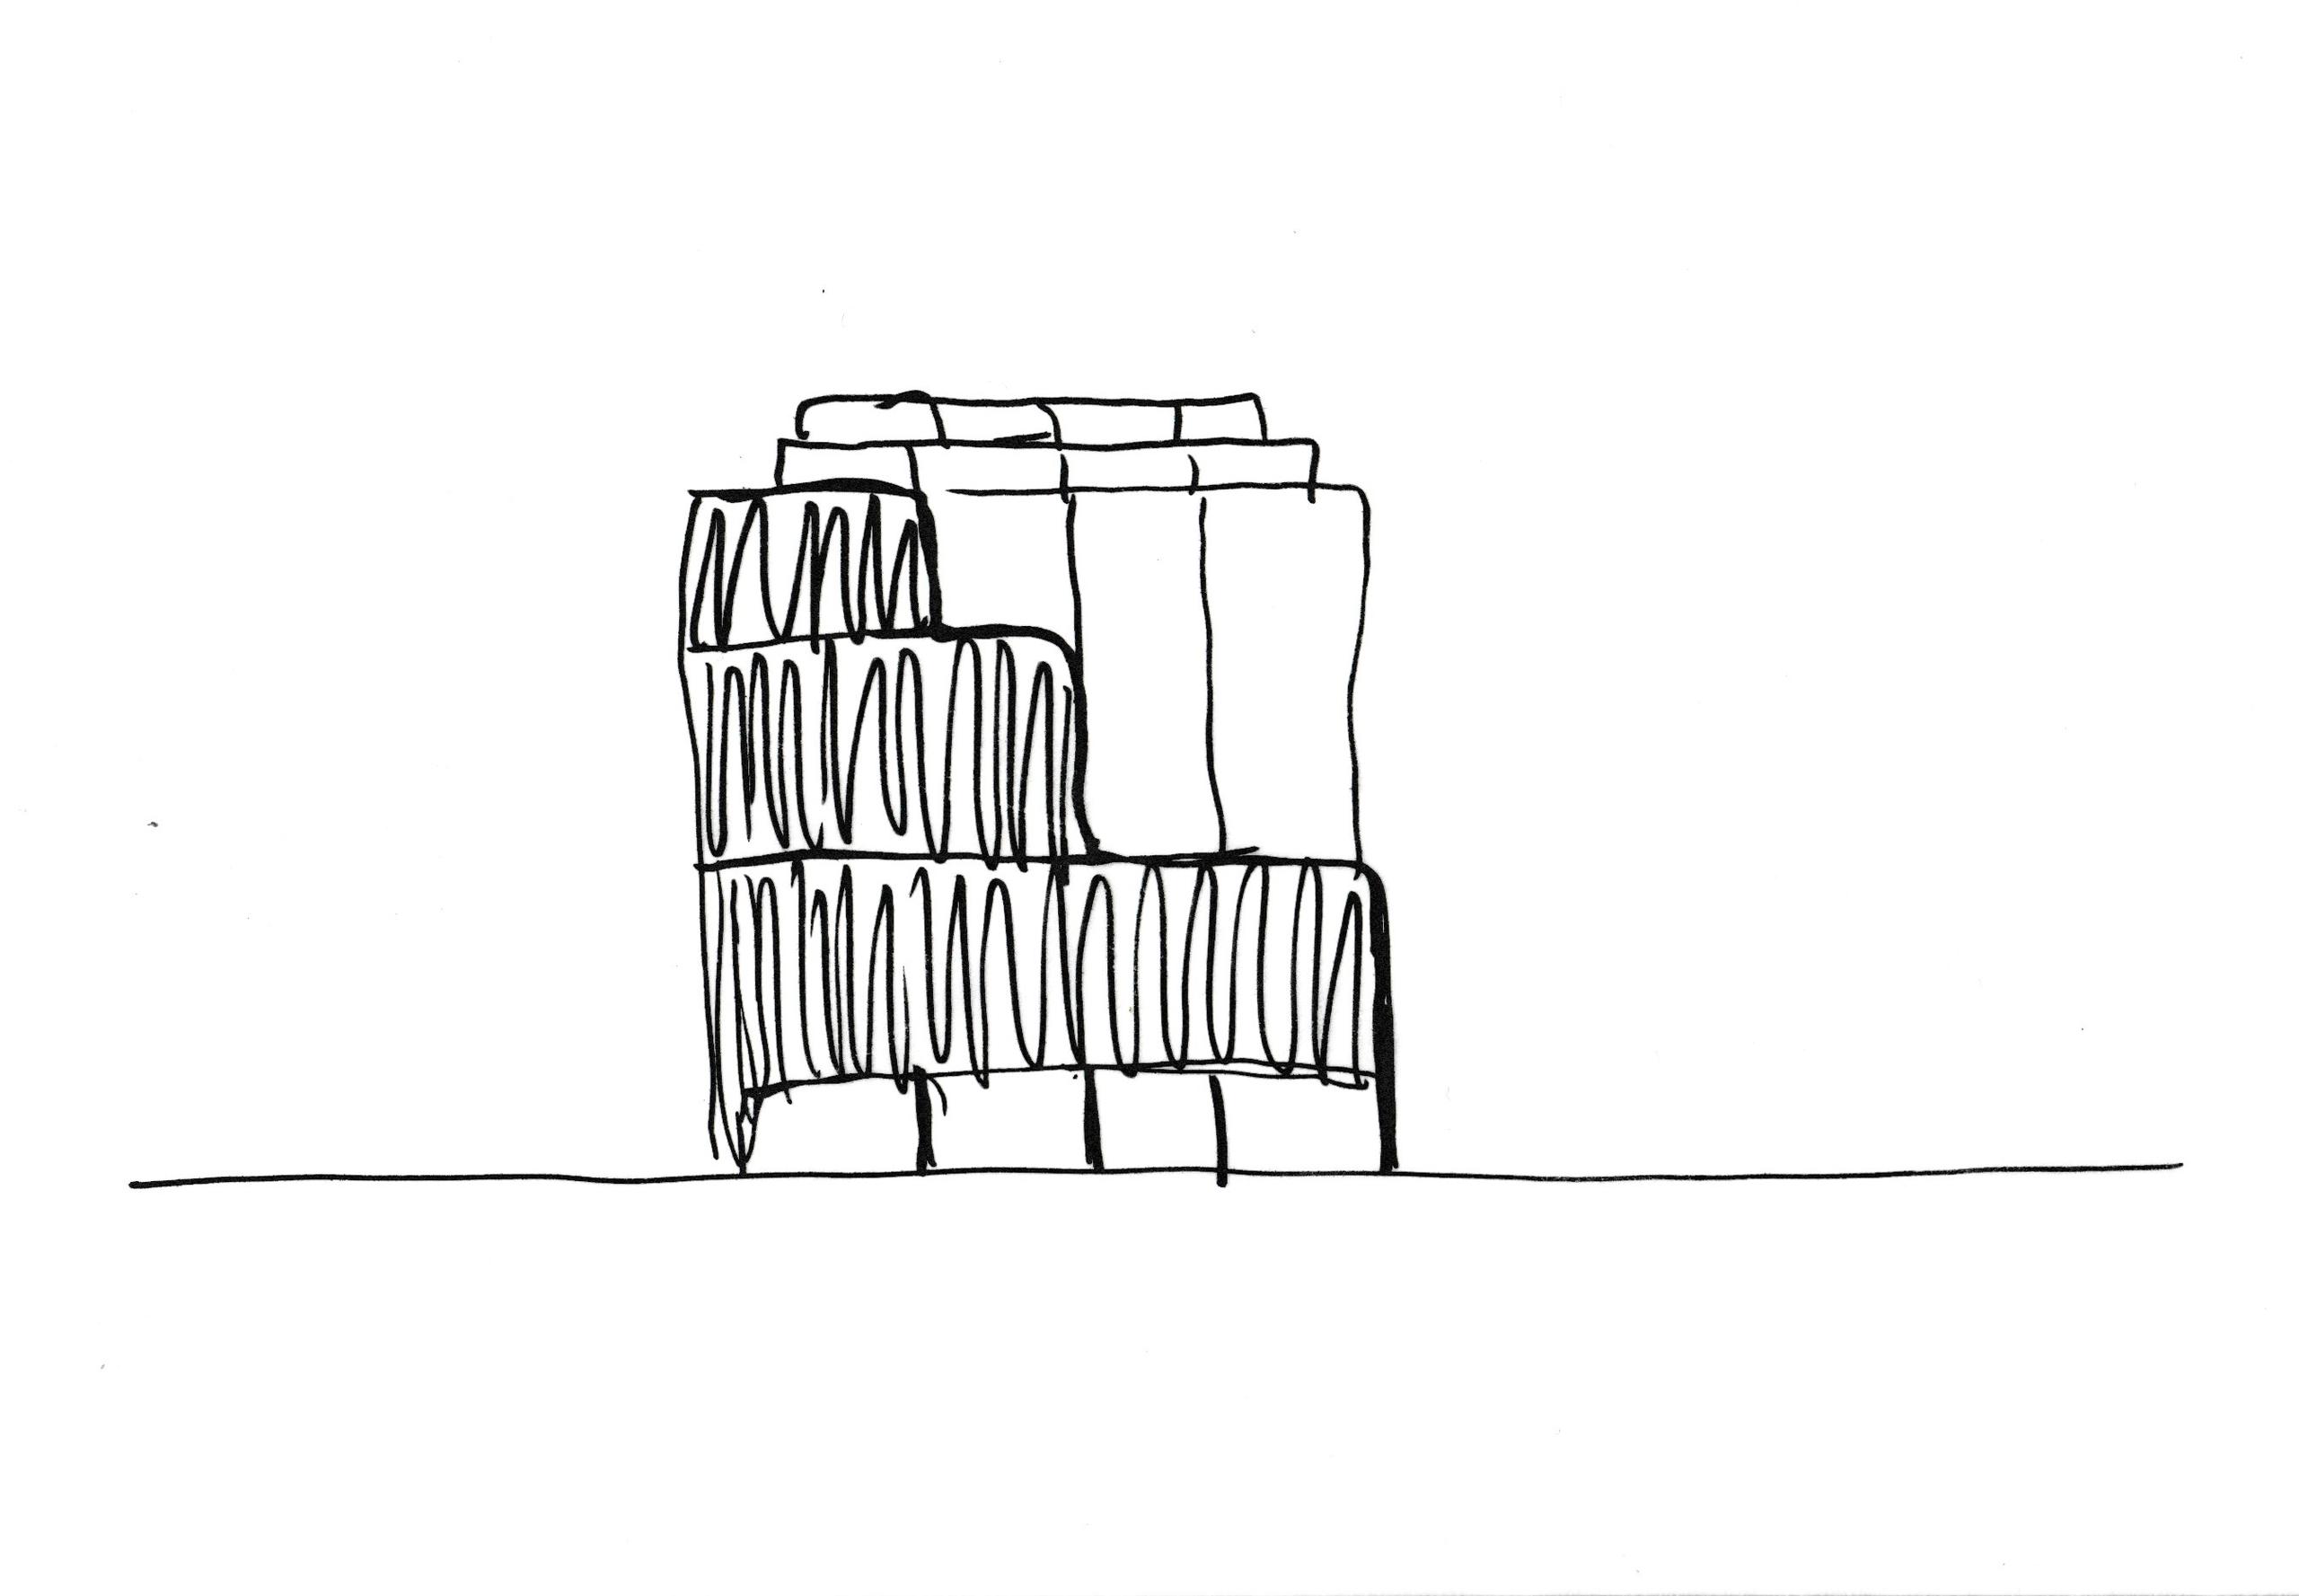 early concept sketch of Biblio showing block patterned facade rather than the current arches